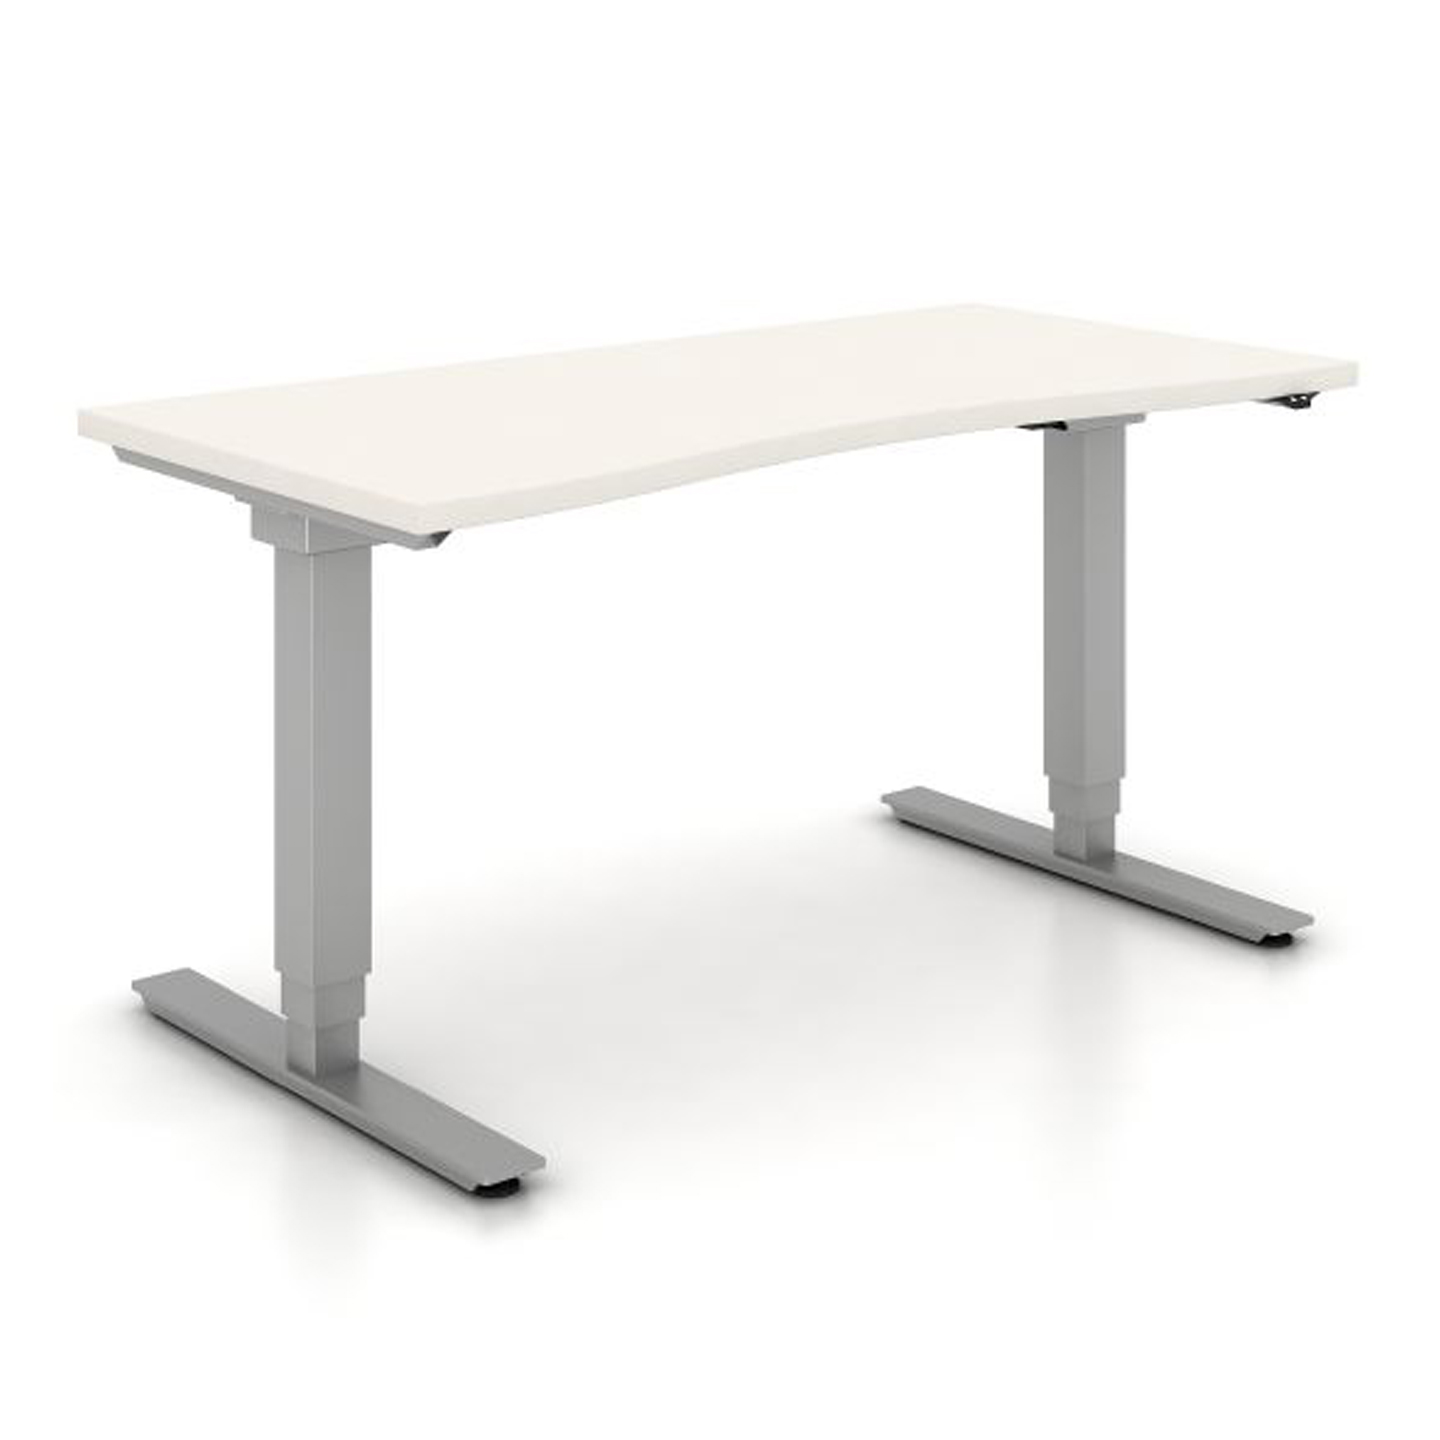 Haworth Hop Electric Height Adjustable Table with 2 grey legs and rectangle top